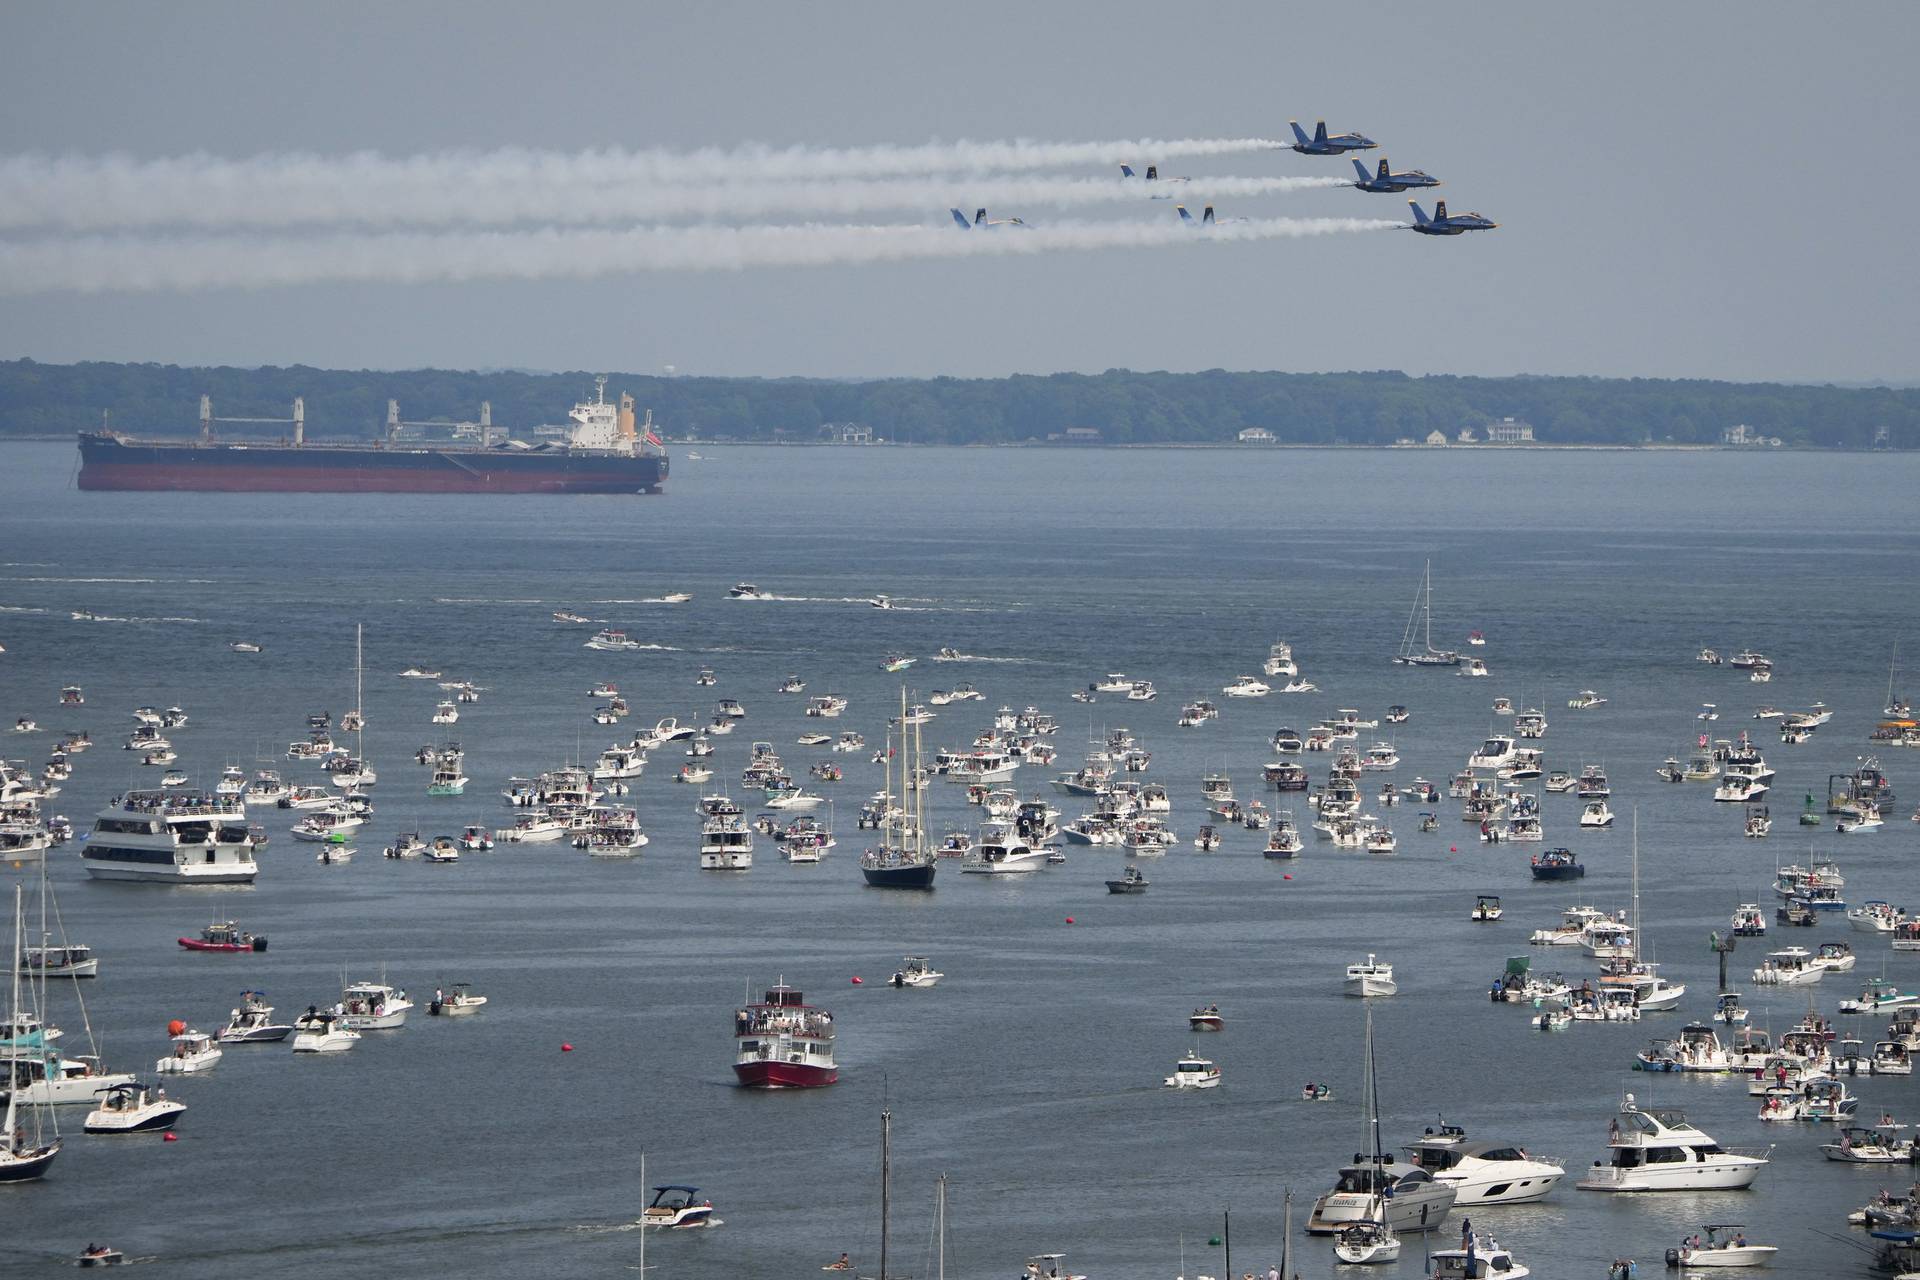 The U.S. Navy Blue Angels fly past the Naval Academy Chapel dome on May 24, 2023, as seen from the top of the State House. The show is part of a series of events during the Naval Academy’s Commissioning Week, all leading up to the graduation ceremony on Friday morning.